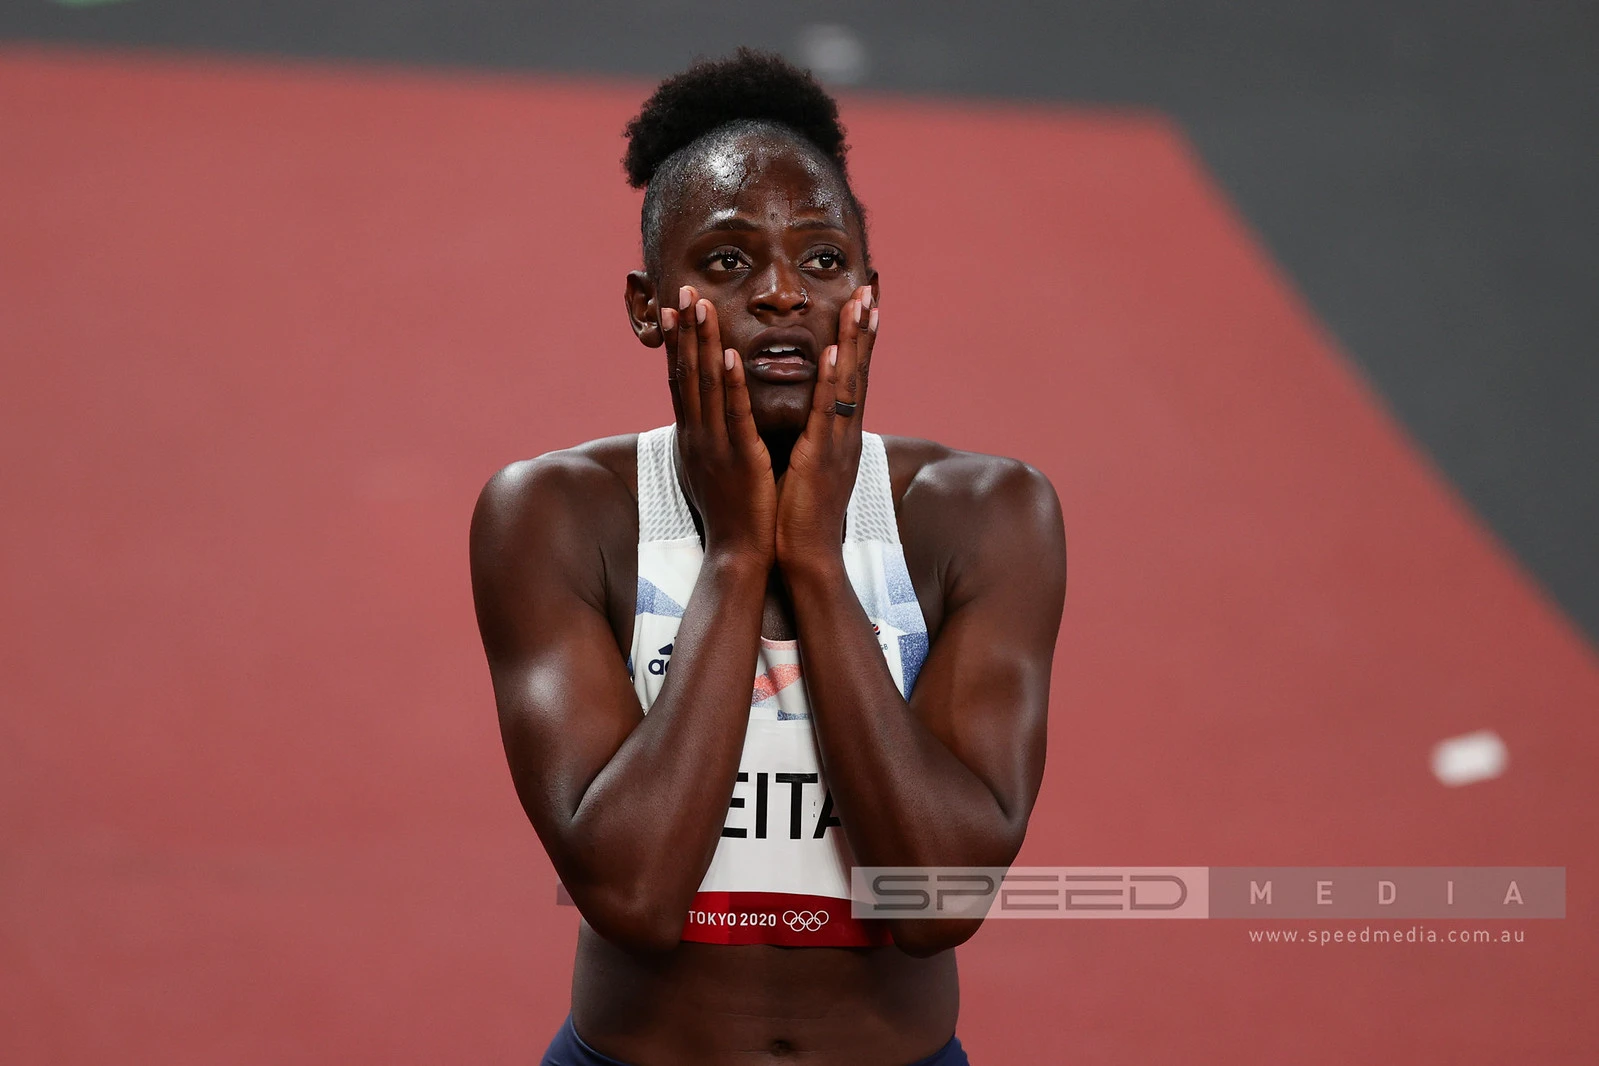 Will Asher-Smith bounce back from defeat to Neita at Stockholm Diamond League?